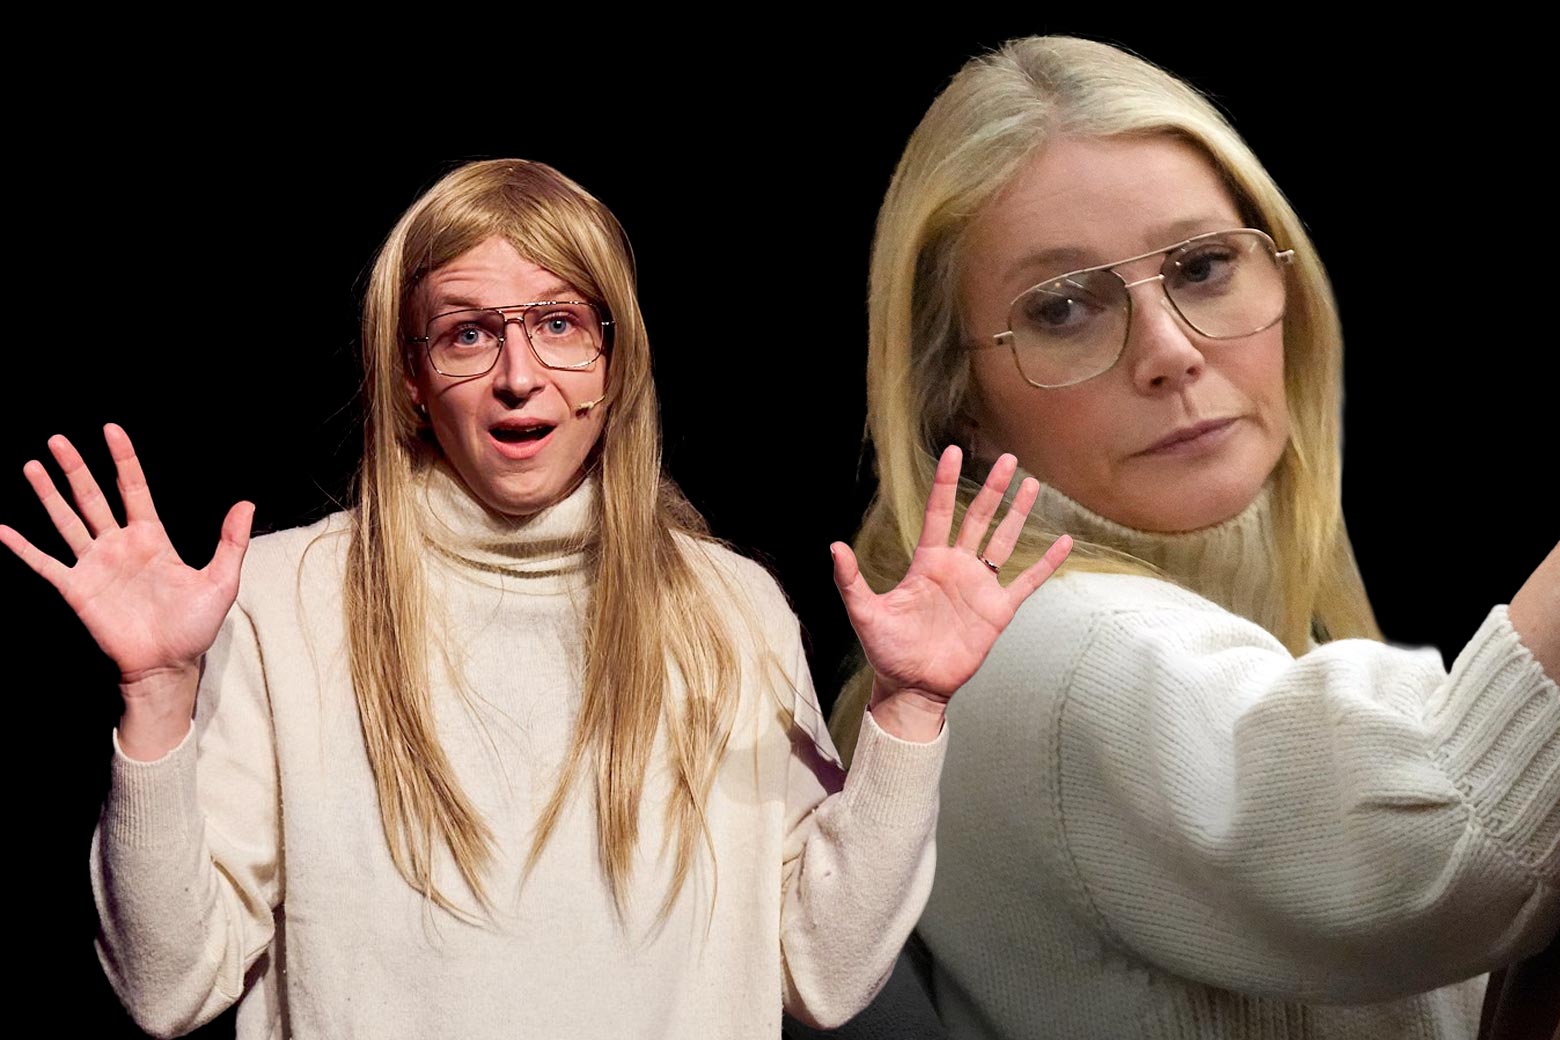 A performer dressed as Gwyneth Paltrow in large square glasses and a cream sweater is juxtapositioned with a real photo of Gwyneth wearing those items during the trial.